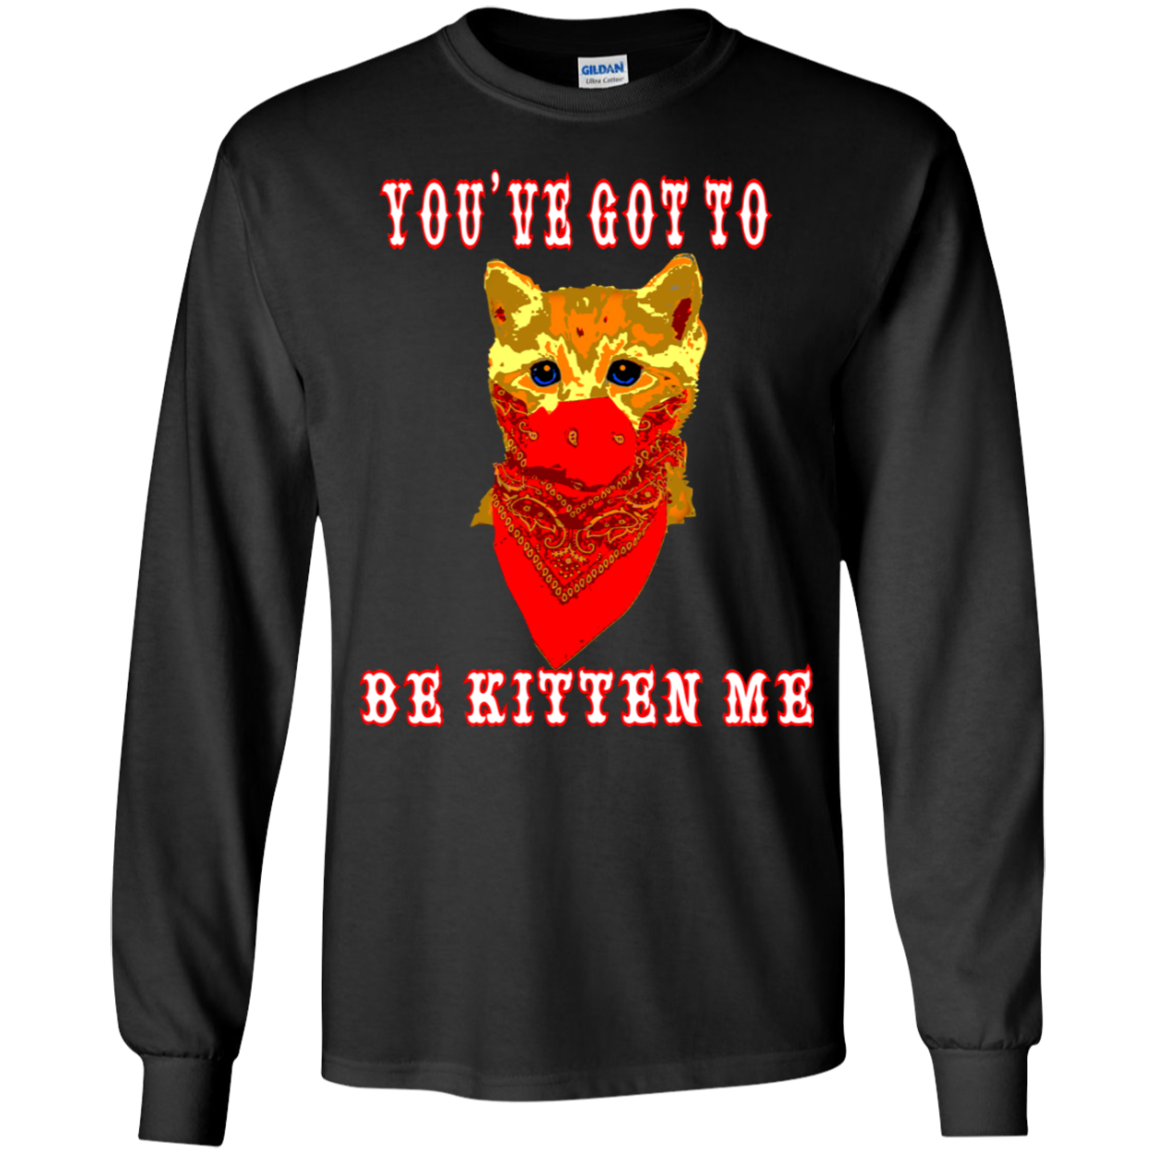 ArtichokeUSA Custom Design. You've Got To Be Kitten Me?! 2020, Not What We Expected. Youth LS T-Shirt